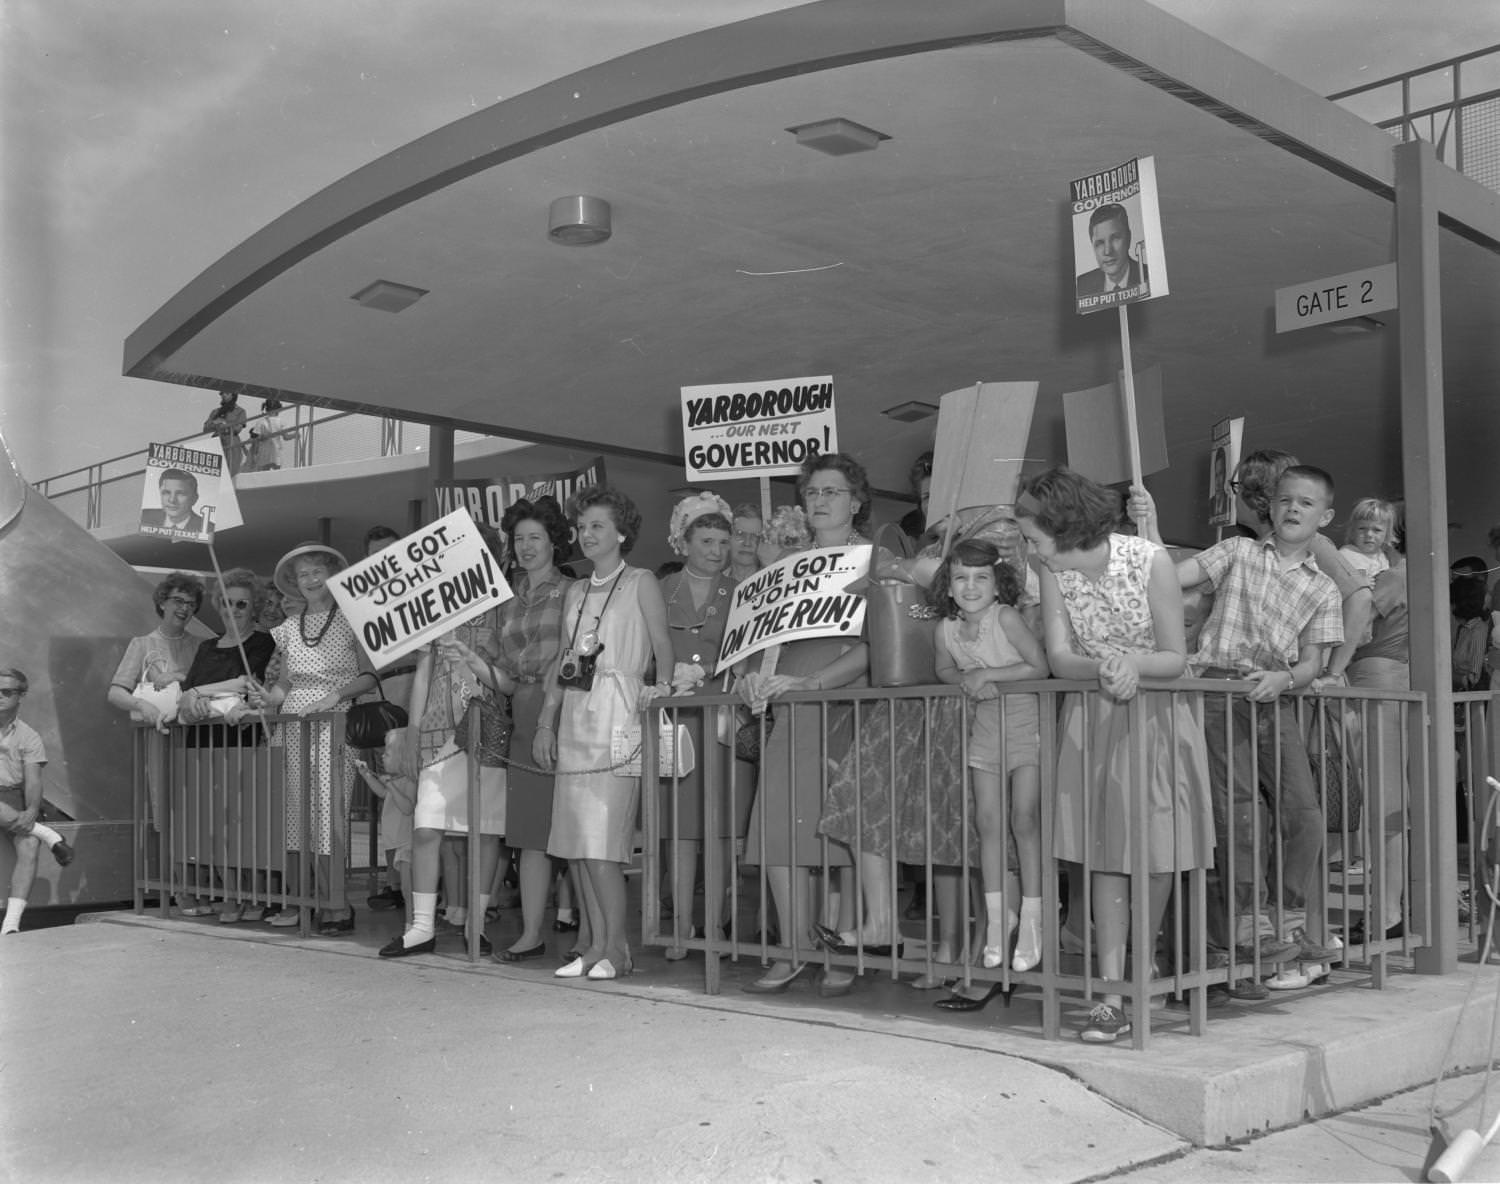 Supporters of gubernatorial candidate, Don Yarborough, standing with signs in a fenced area, 1962